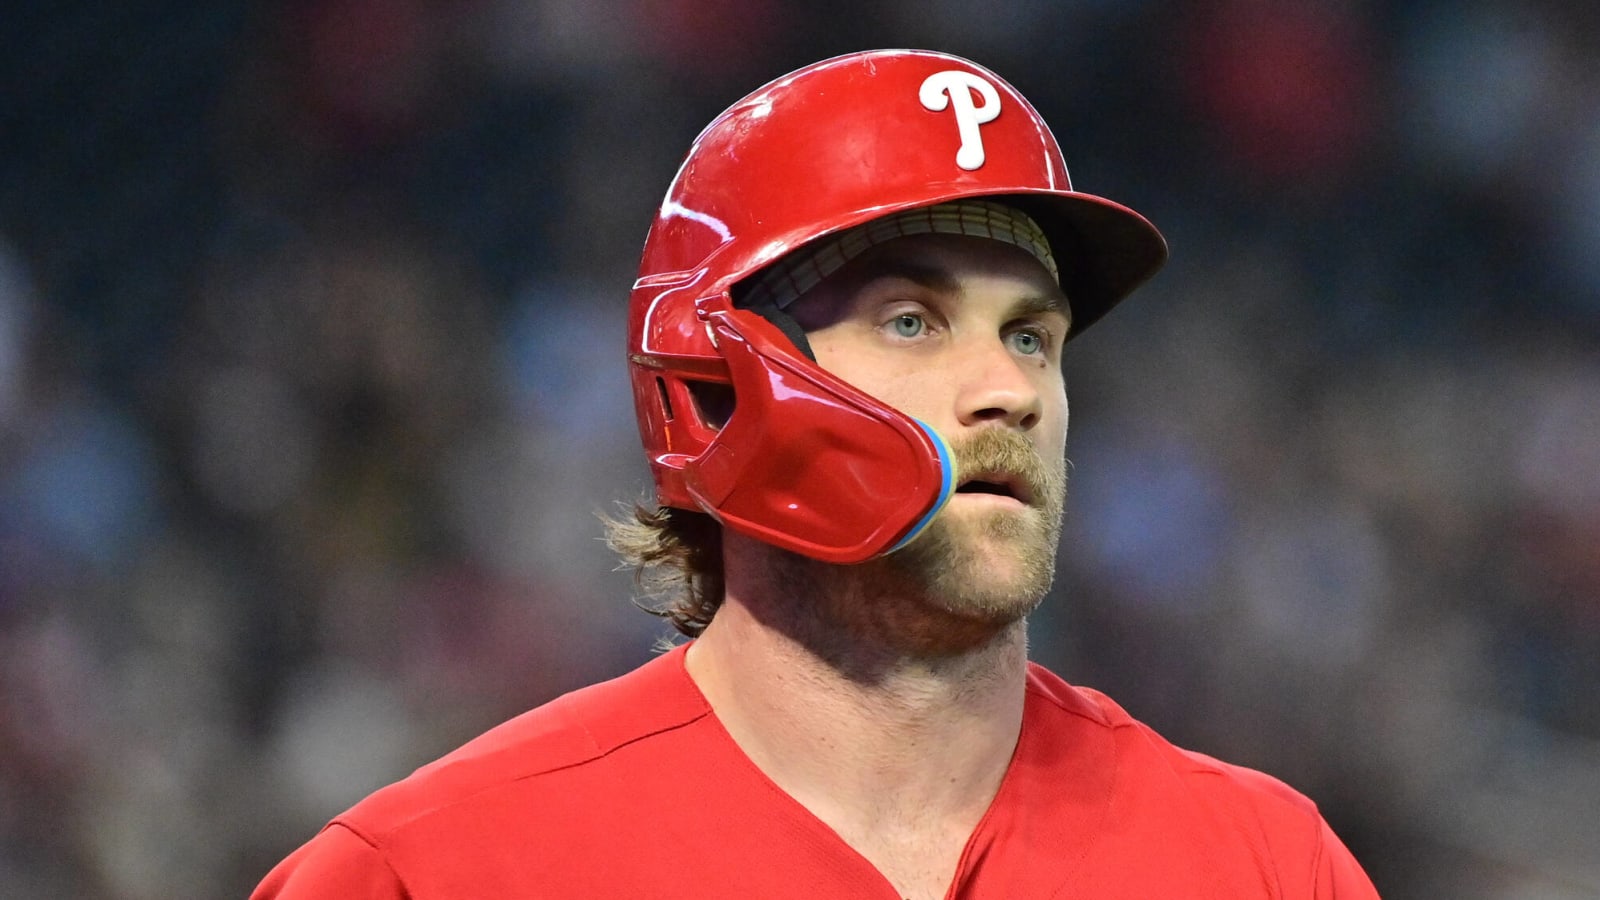 Las Vegas native Bryce Harper shares surprising take on A's move